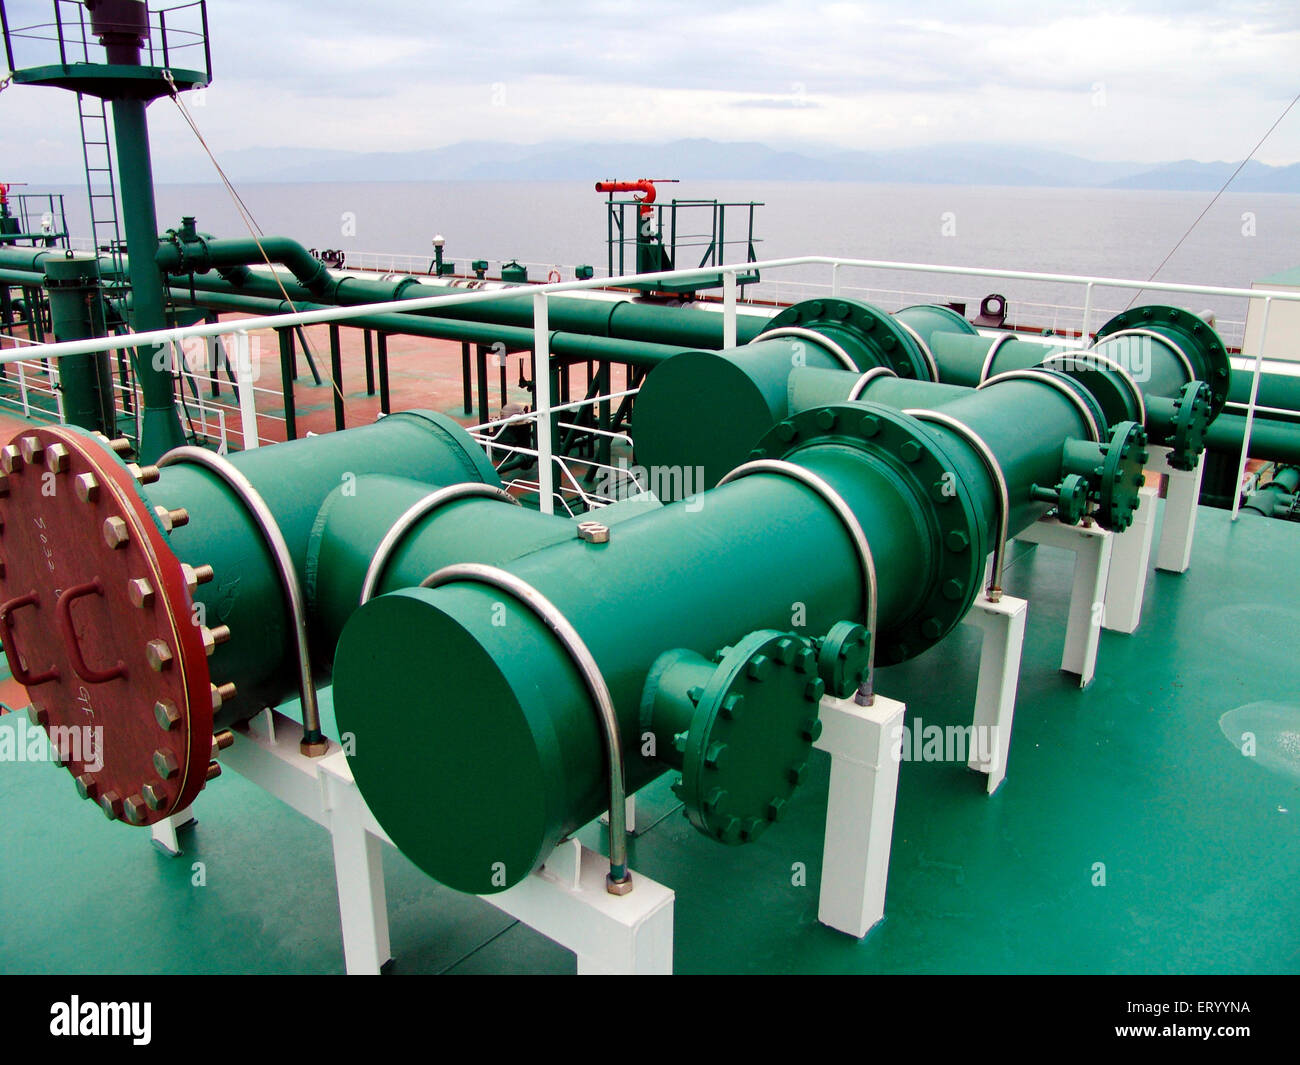 Oil pipes on merchant vessel ship Stock Photo